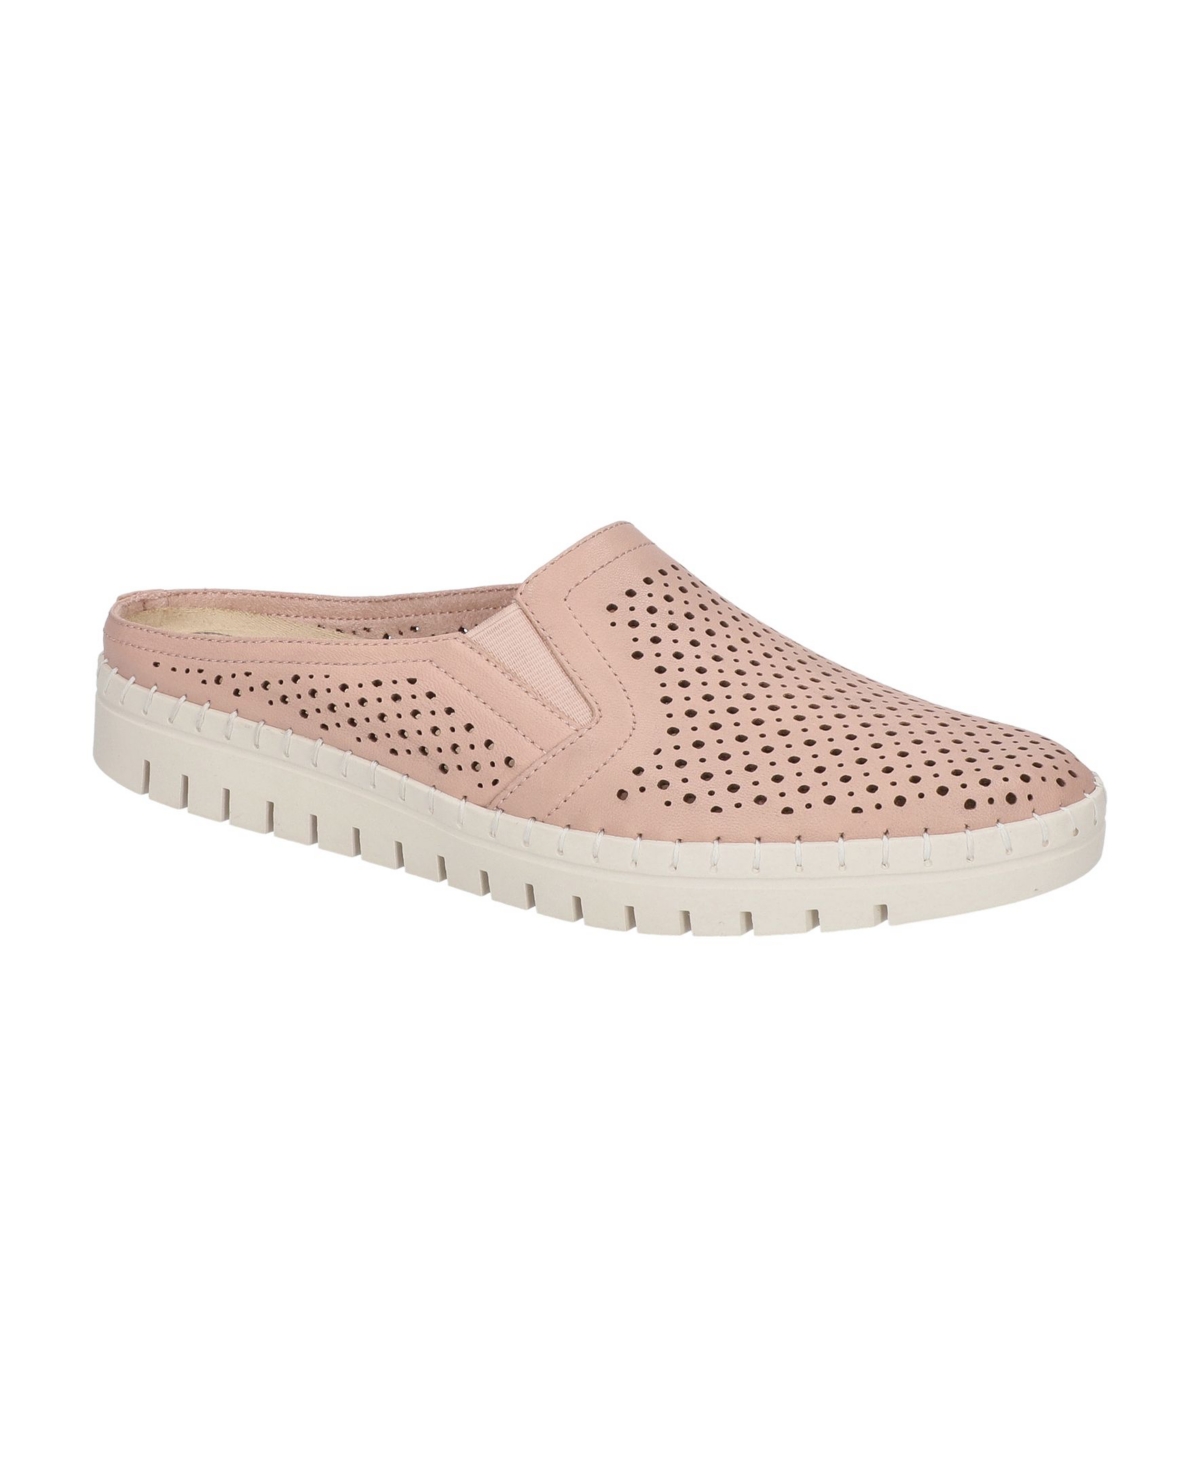 Women's Refresh Altheisure Mules - Blush Leather